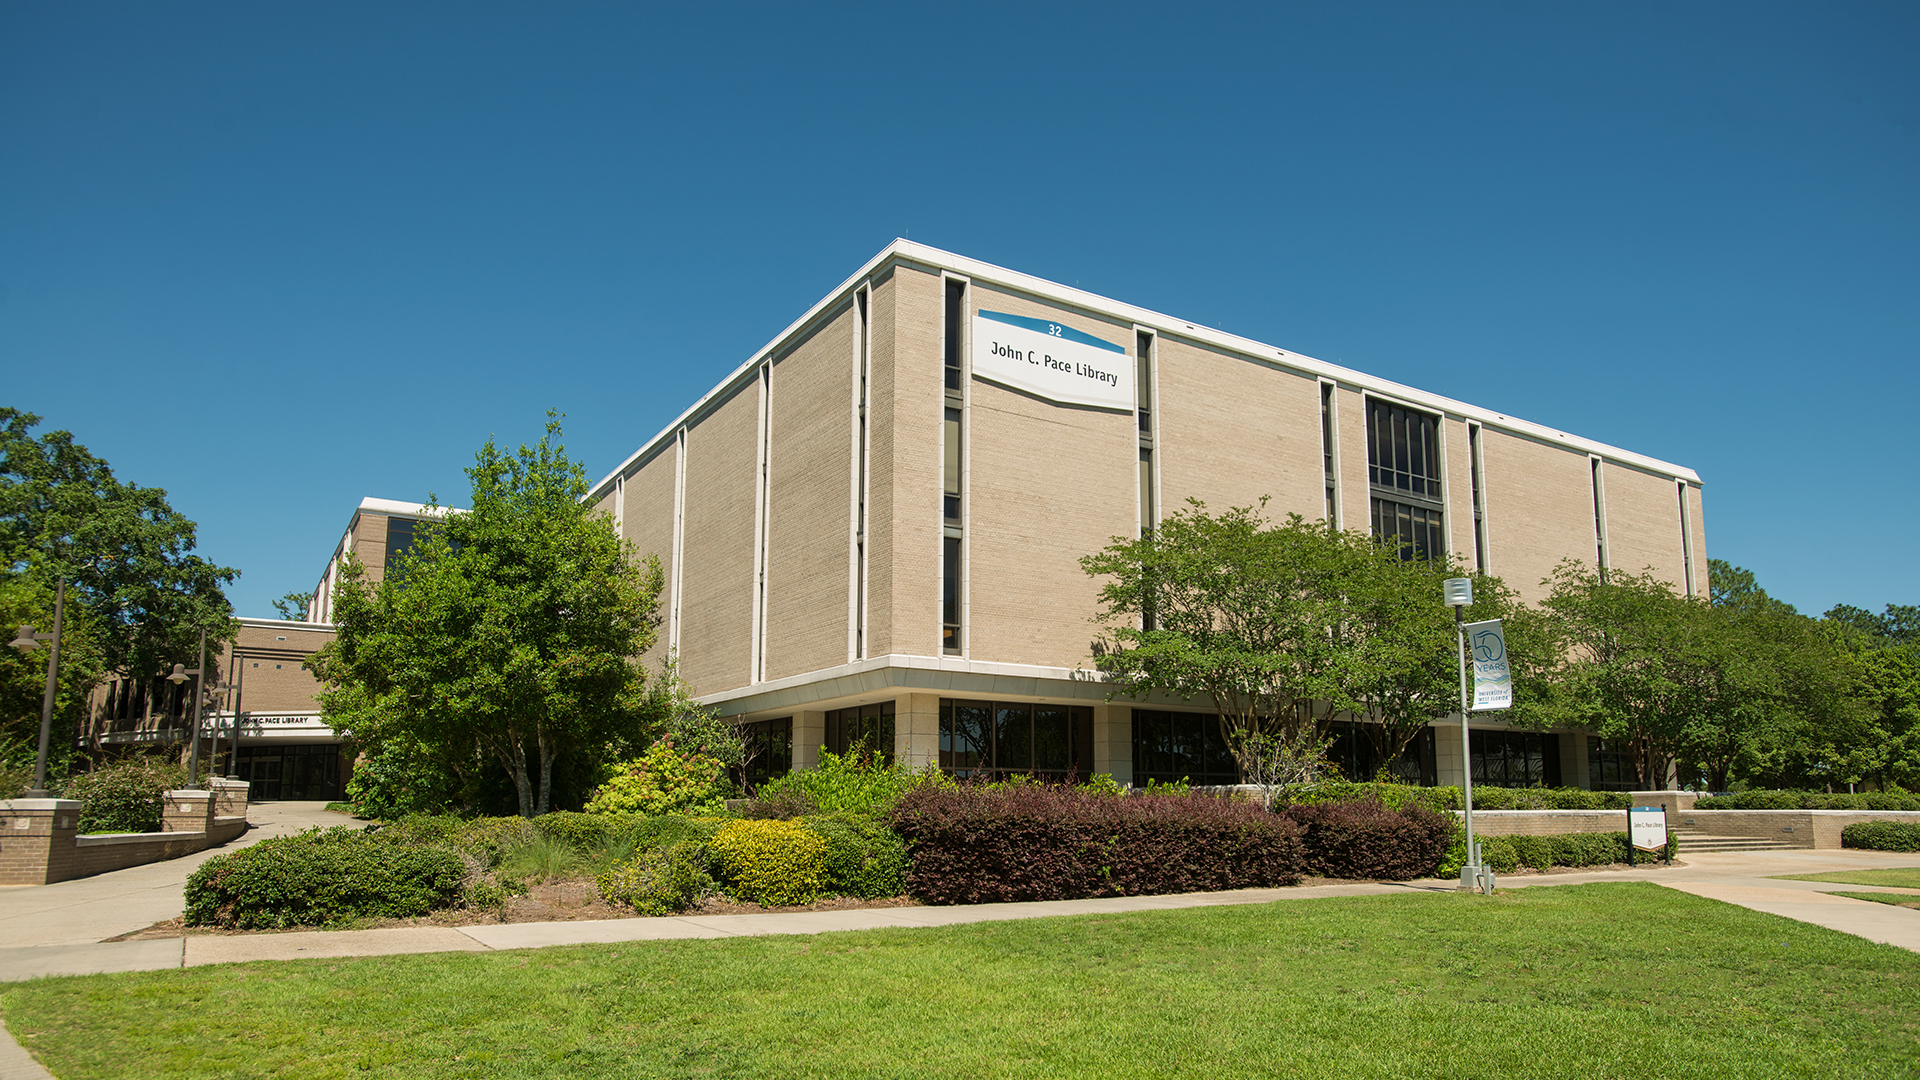 Exterior photo of the John C. Pace library.